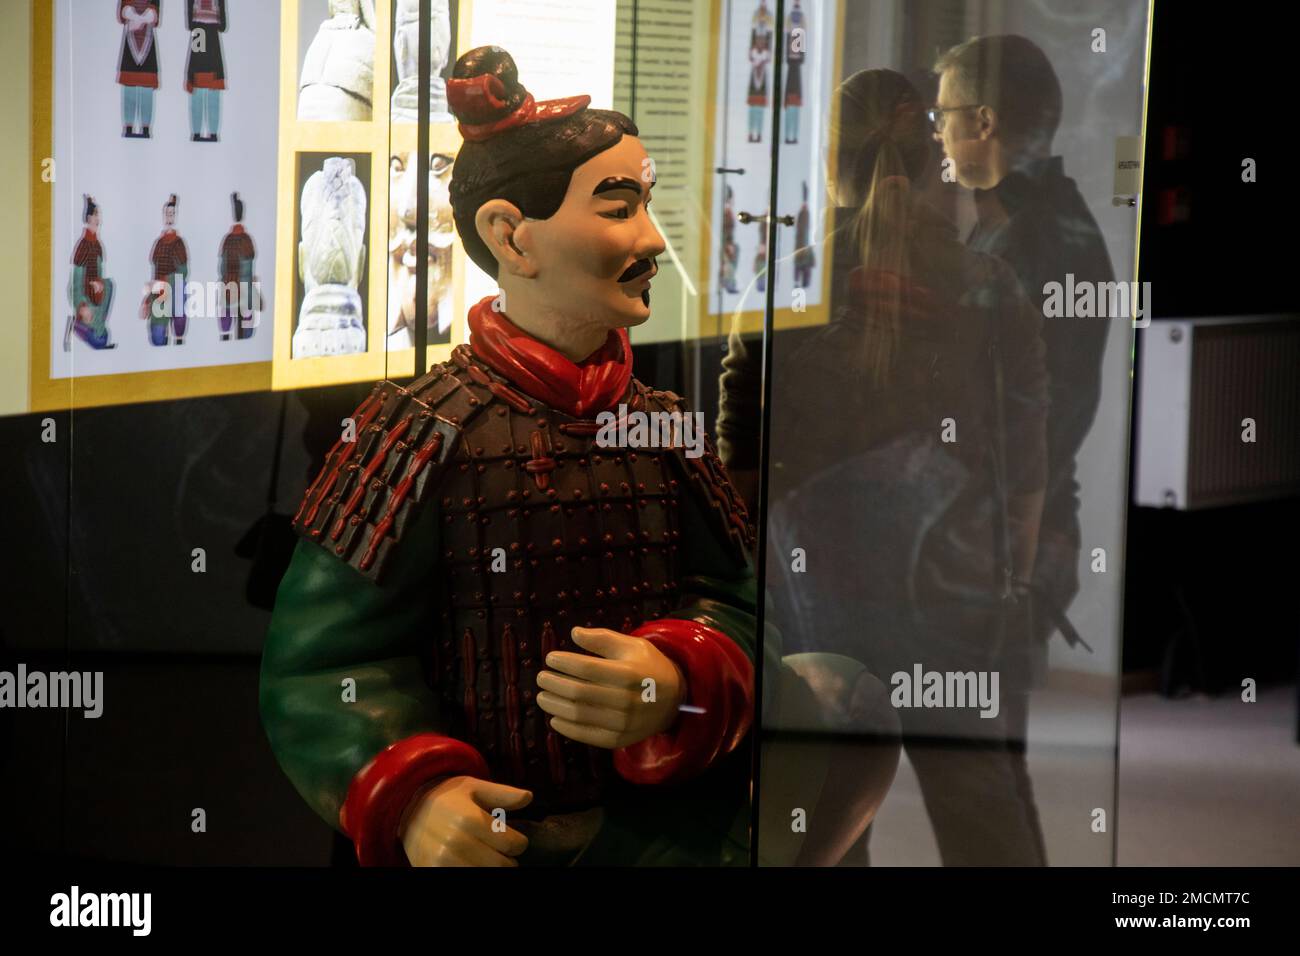 Moscow, Russia. 21st of January, 2023. People attend the Terracotta Army exhibition at Pavilion 21 of VDNKh on Lunar New Year's Eve. 2023 is the Year of the Rabbit. Nikolay Vinokurov/Alamy Live News Stock Photo